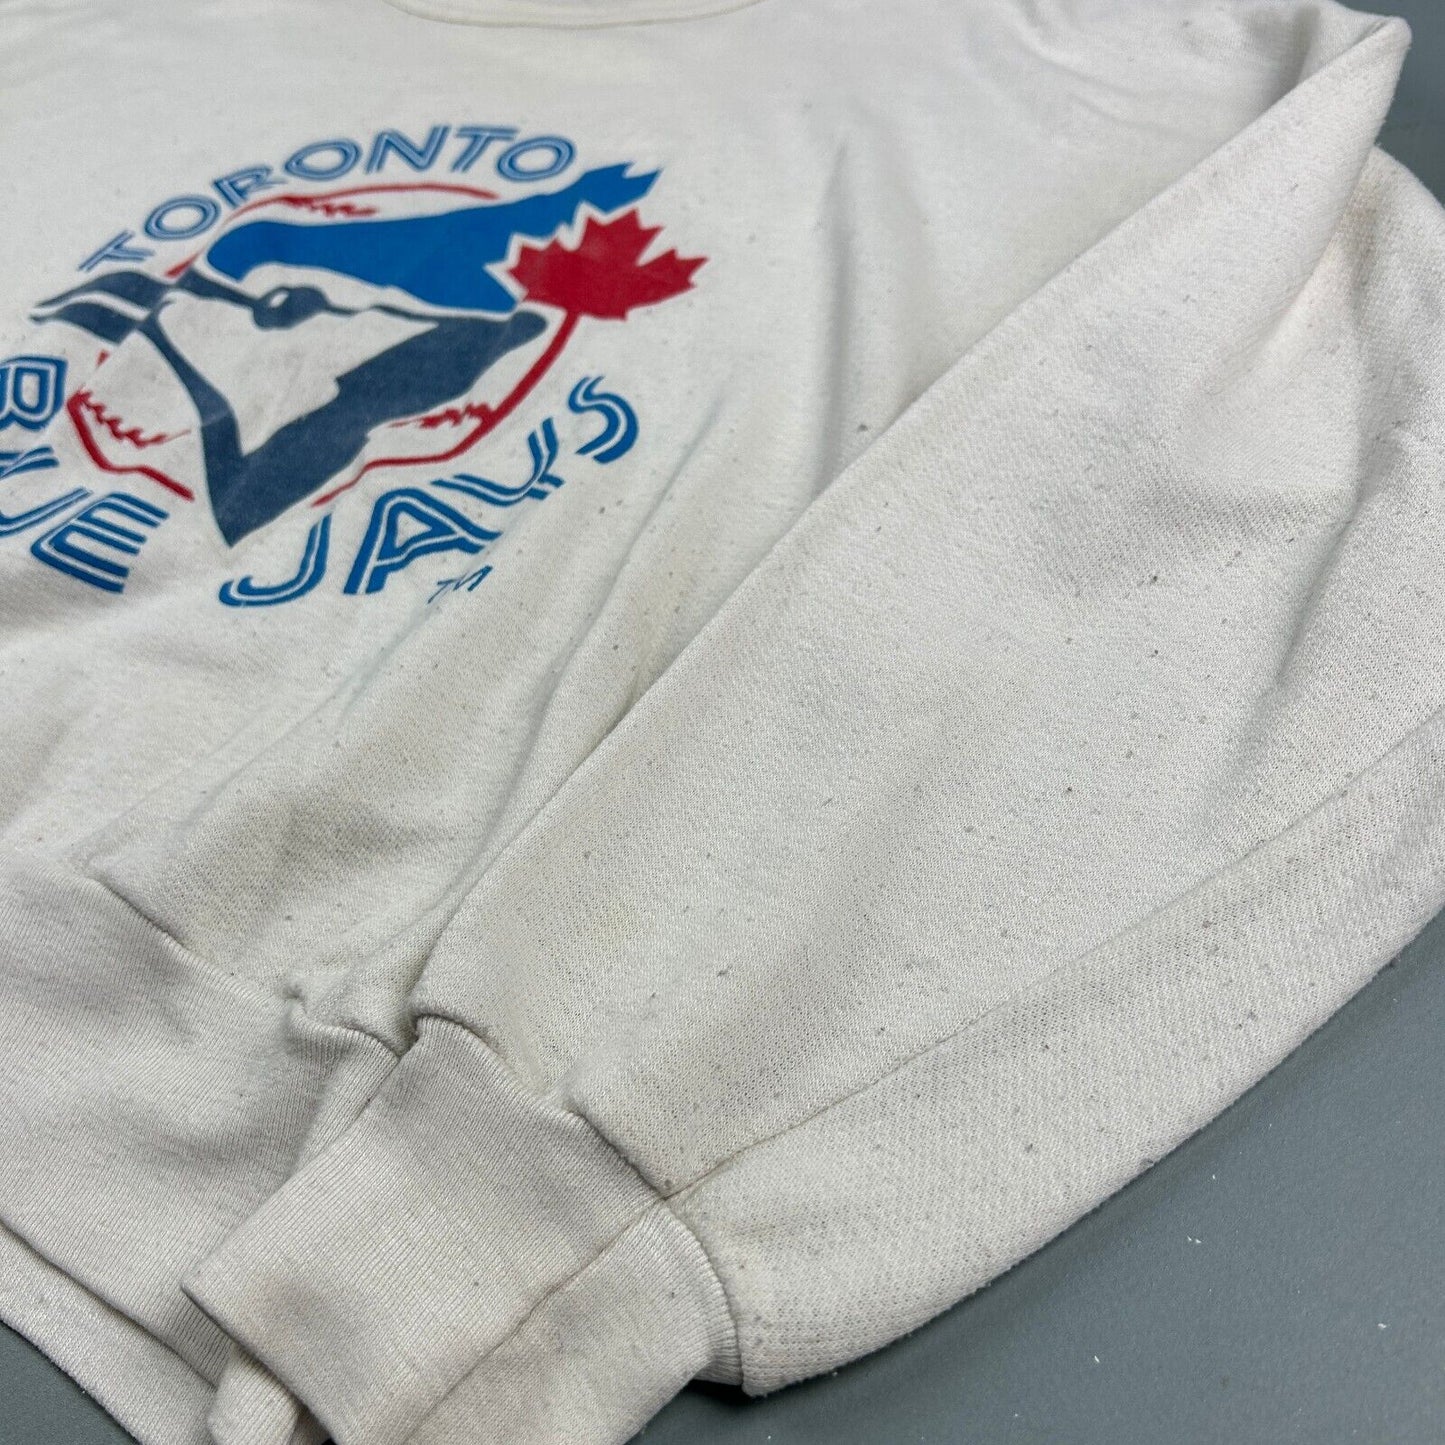 VINTAGE 80s Toronto Blue Jays White Sweater sz Small Short* Adult / Youth XL